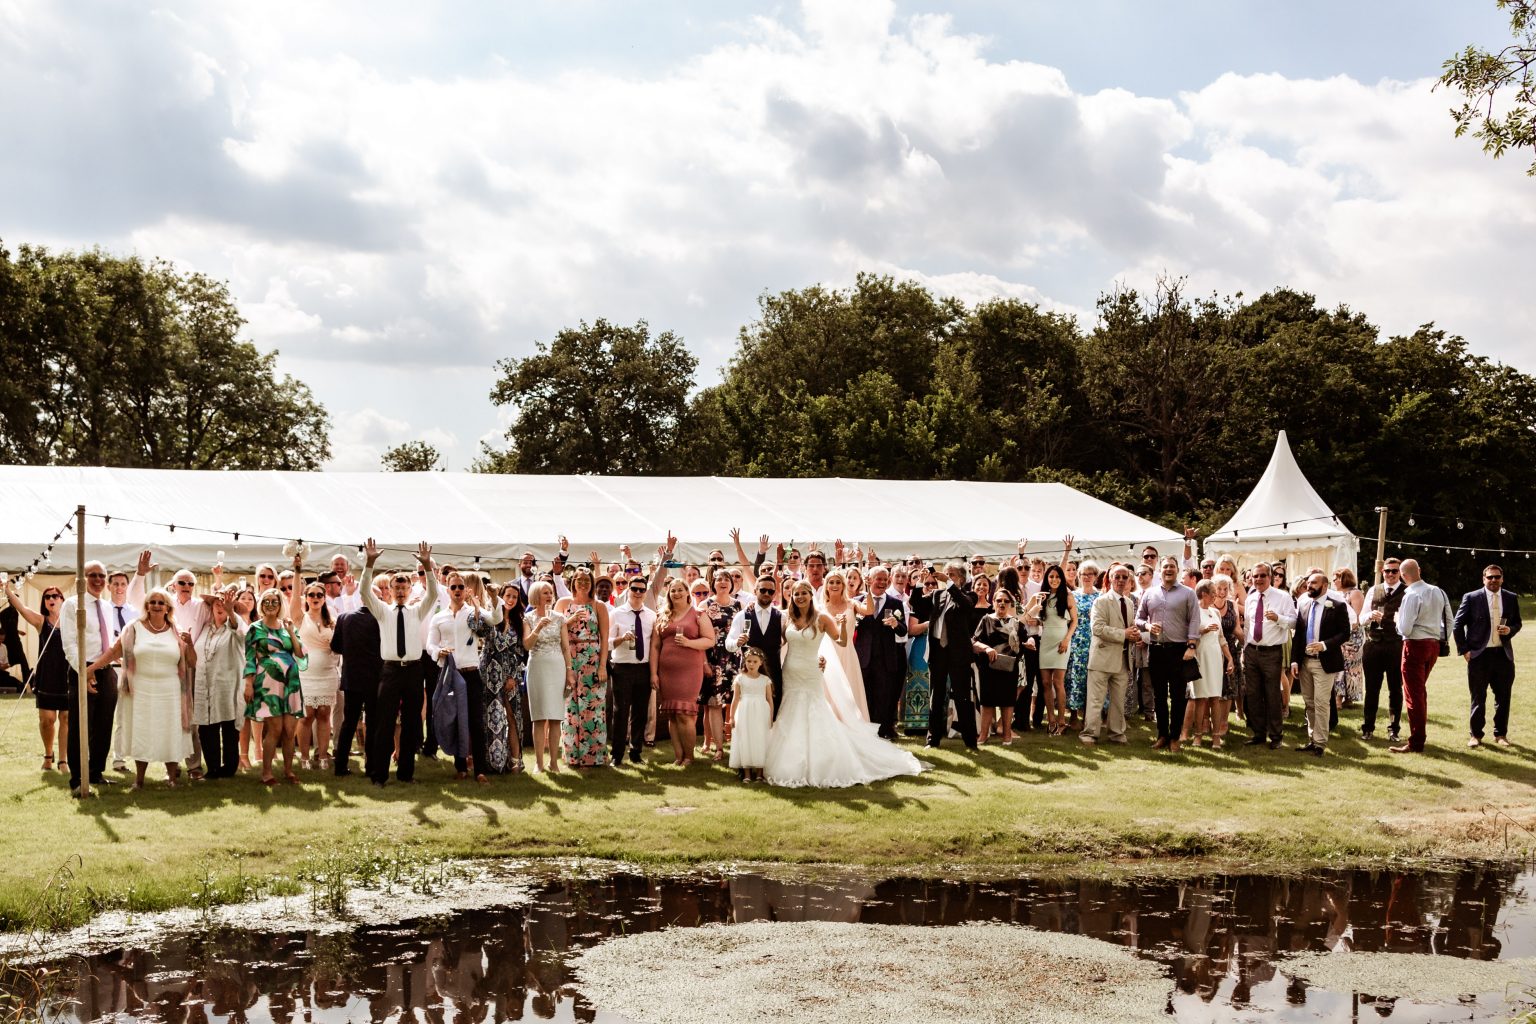 Cotswolds Wedding Photographer – Elegant country marquee wedding in Ongar, Essex at the Church of St Germain, Bobbingworth – Essex wedding photographer	